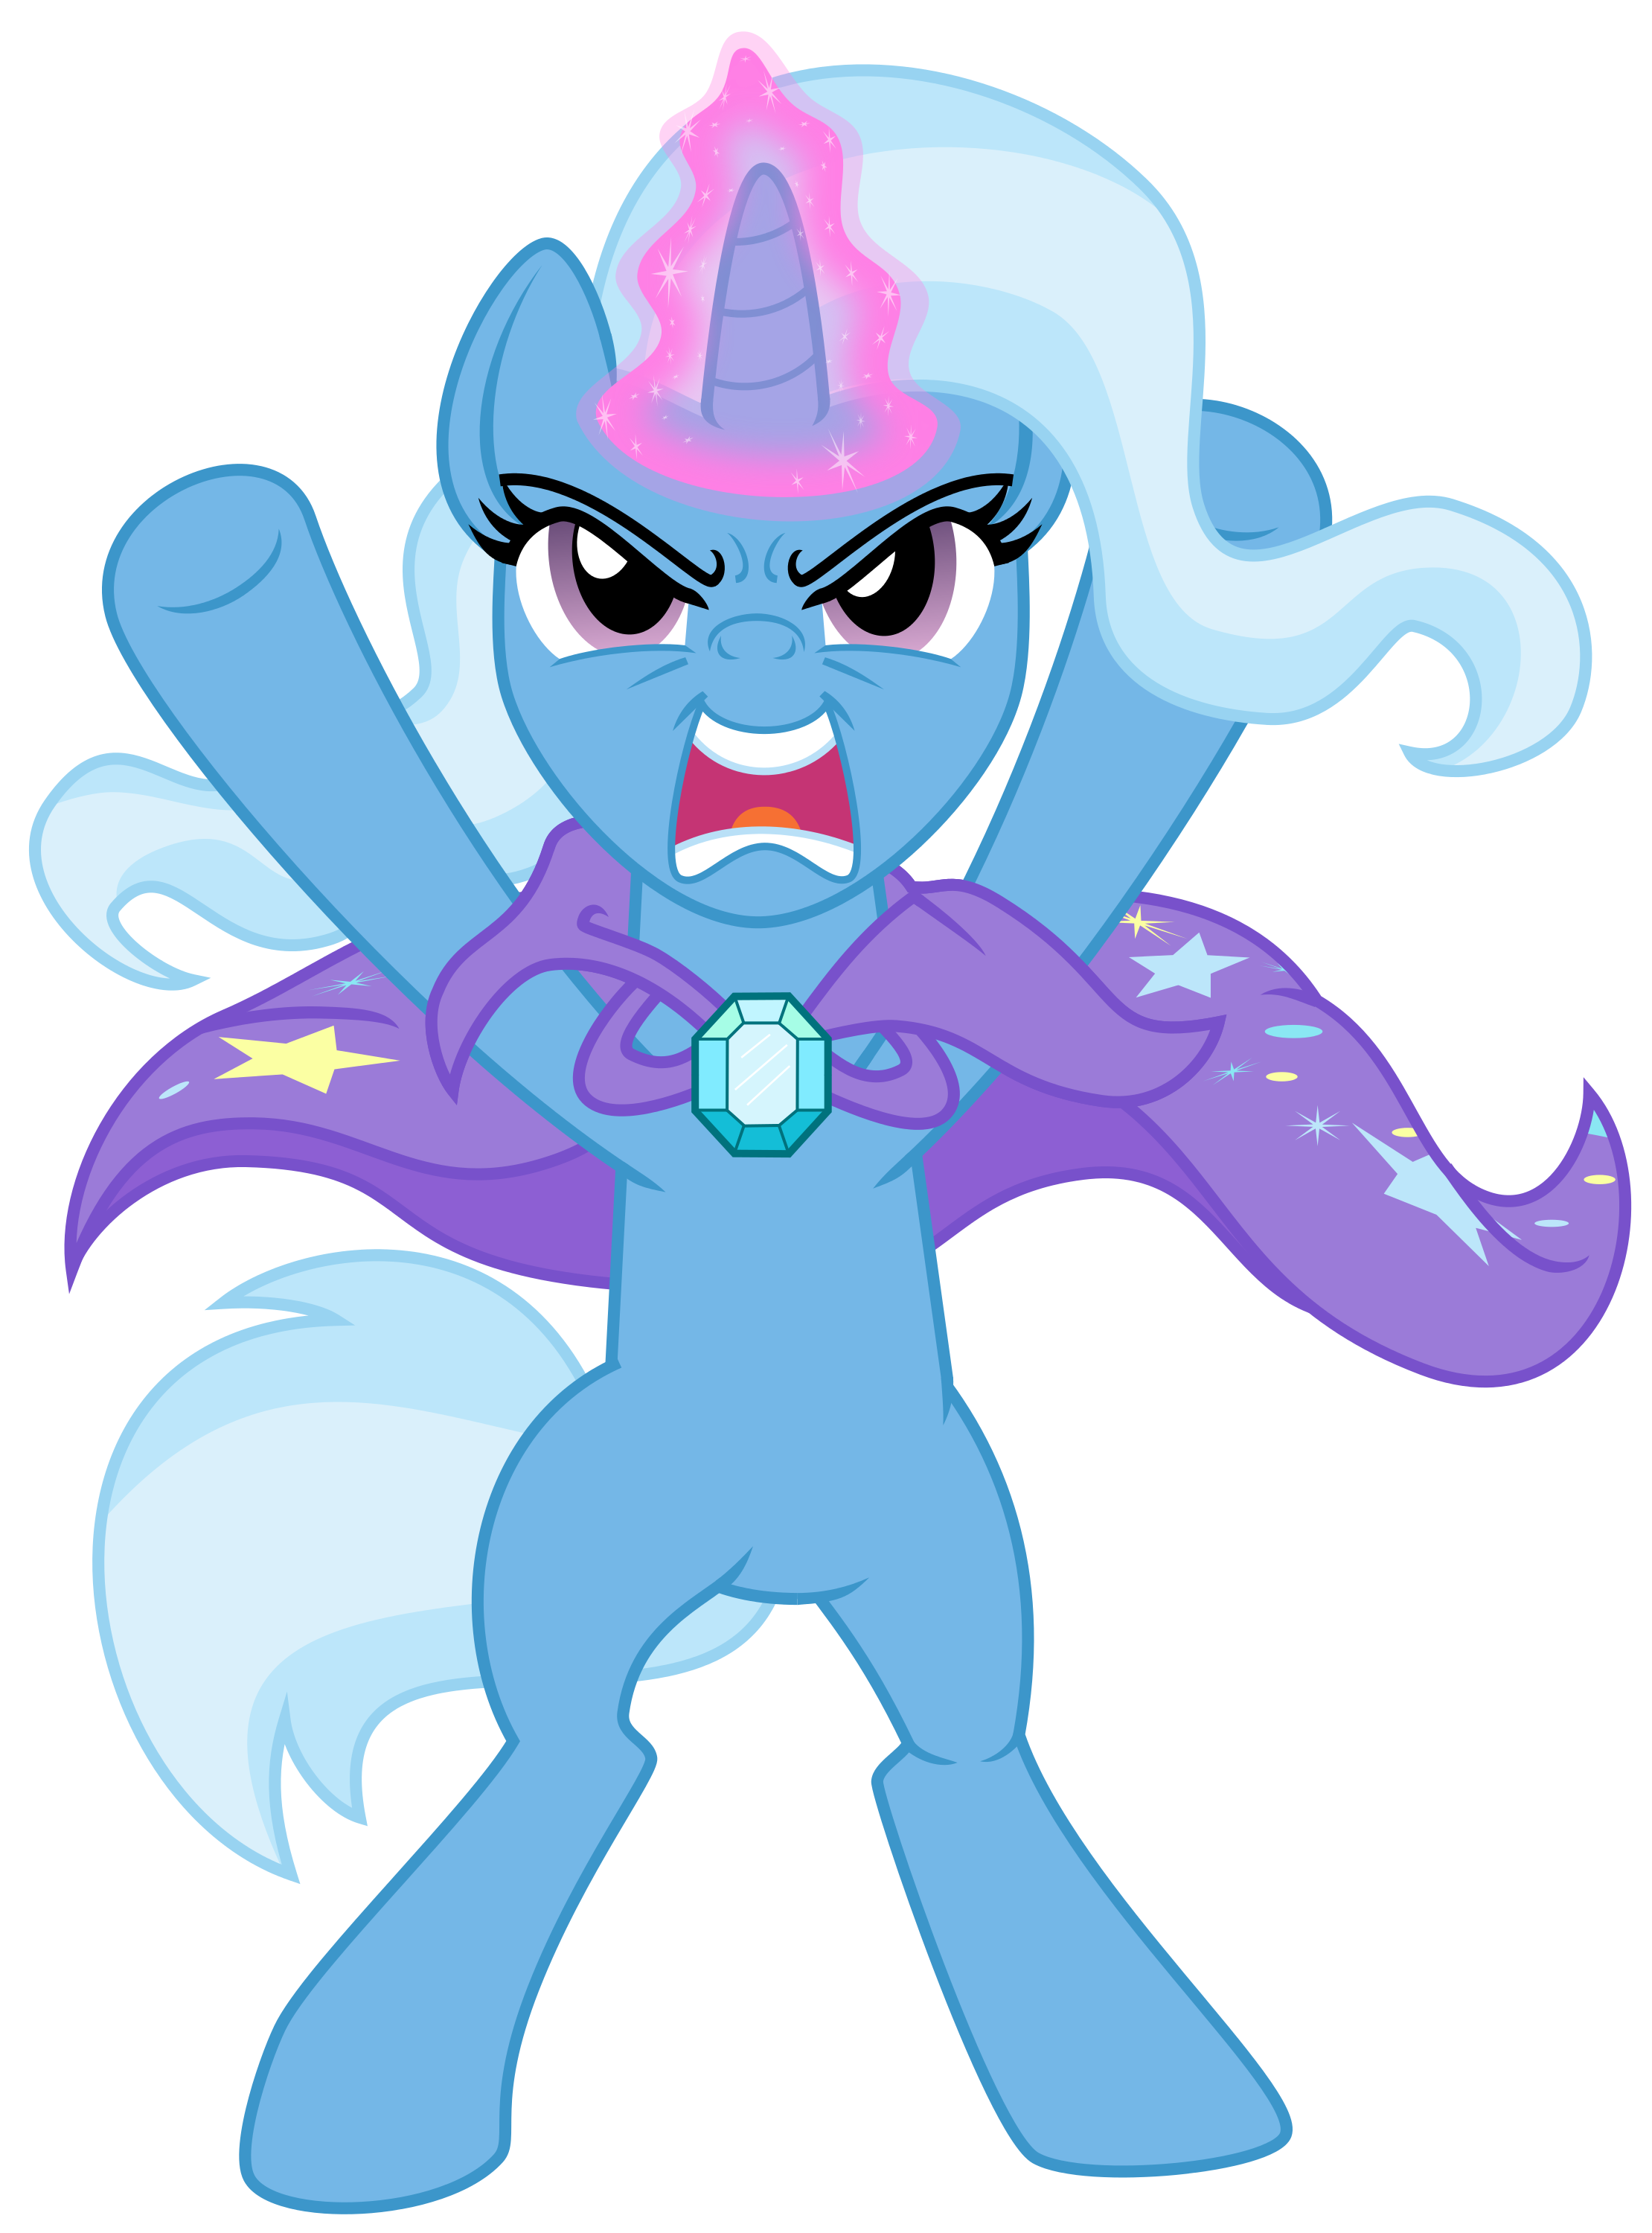 310905__safe_trixie_magic_angry_artist-c